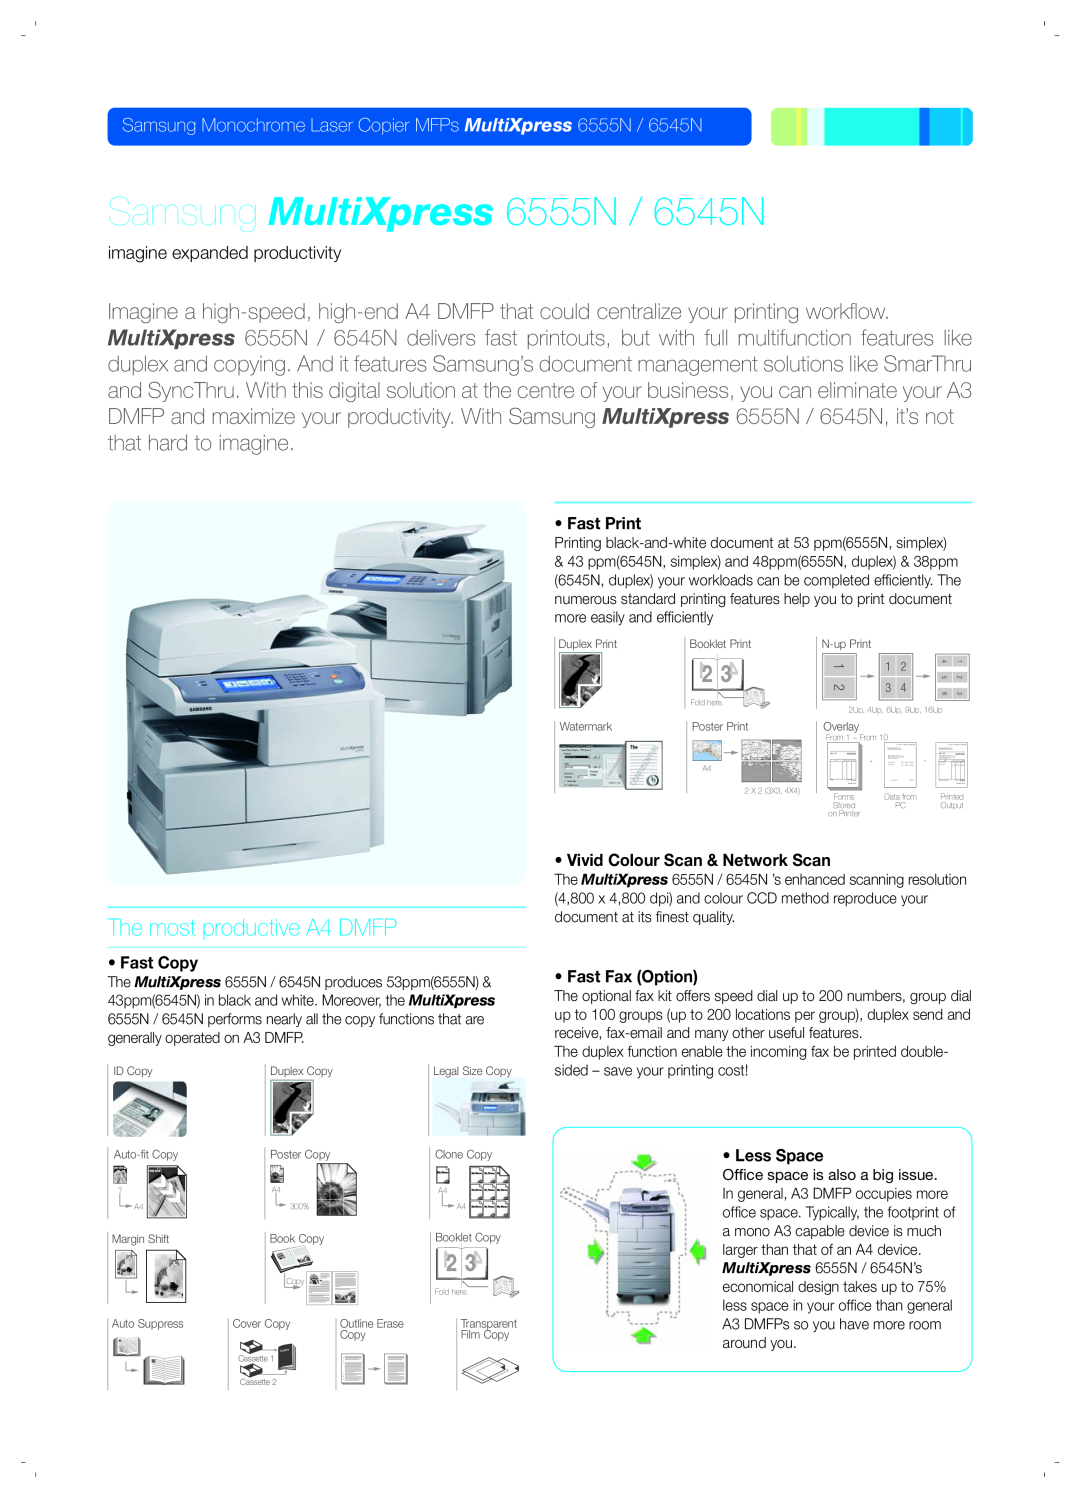 Samsung SCXFIN20S manual The most productive A4 DMFP, Samsung MultiXpress 6555N / 6545N 